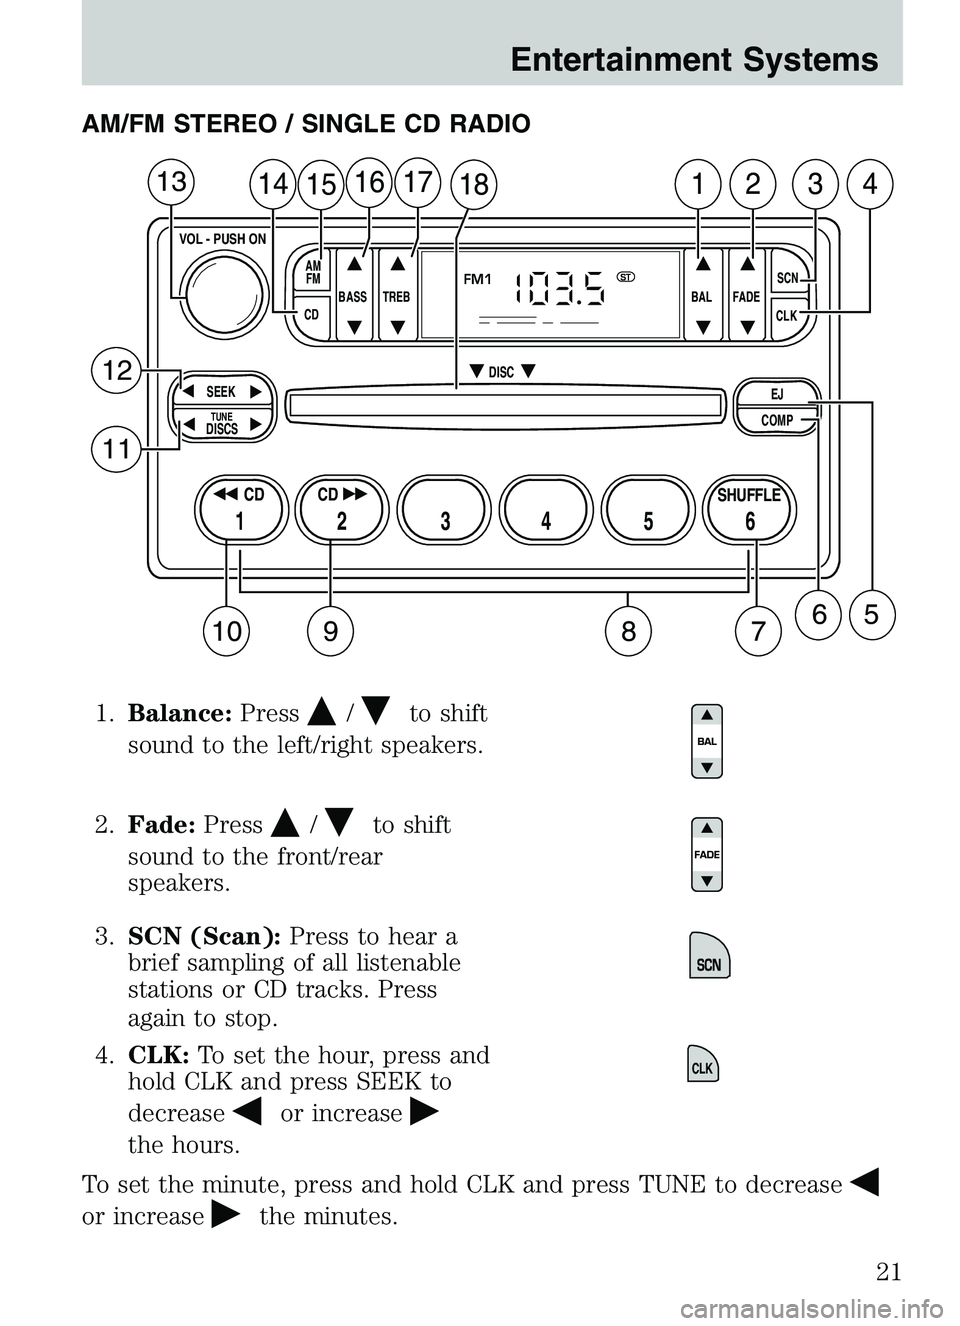 MAZDA MODEL B4000 4WD 2003 Owners Manual AM/FM STEREO / SINGLE CD RADIO1. Balance: Press
/to shift
sound to the left/right speakers.
2. Fade: Press
/to shift
sound to the front/rear
speakers.
3. SCN (Scan): Press to hear a
brief sampling of 